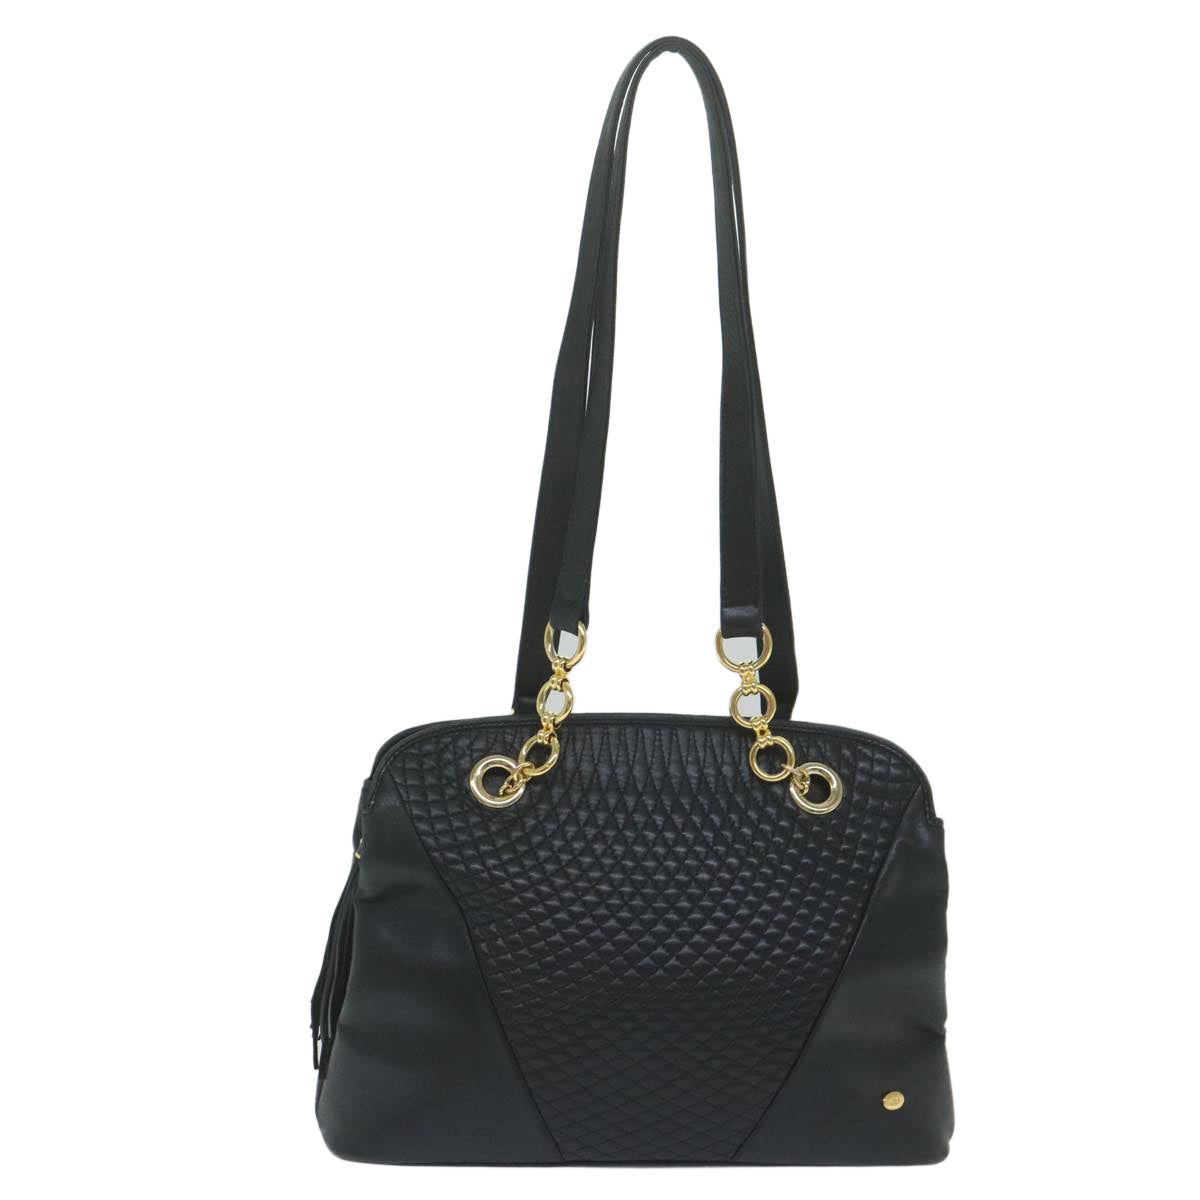 BALLY Tote Bag Leather Black Auth 60671